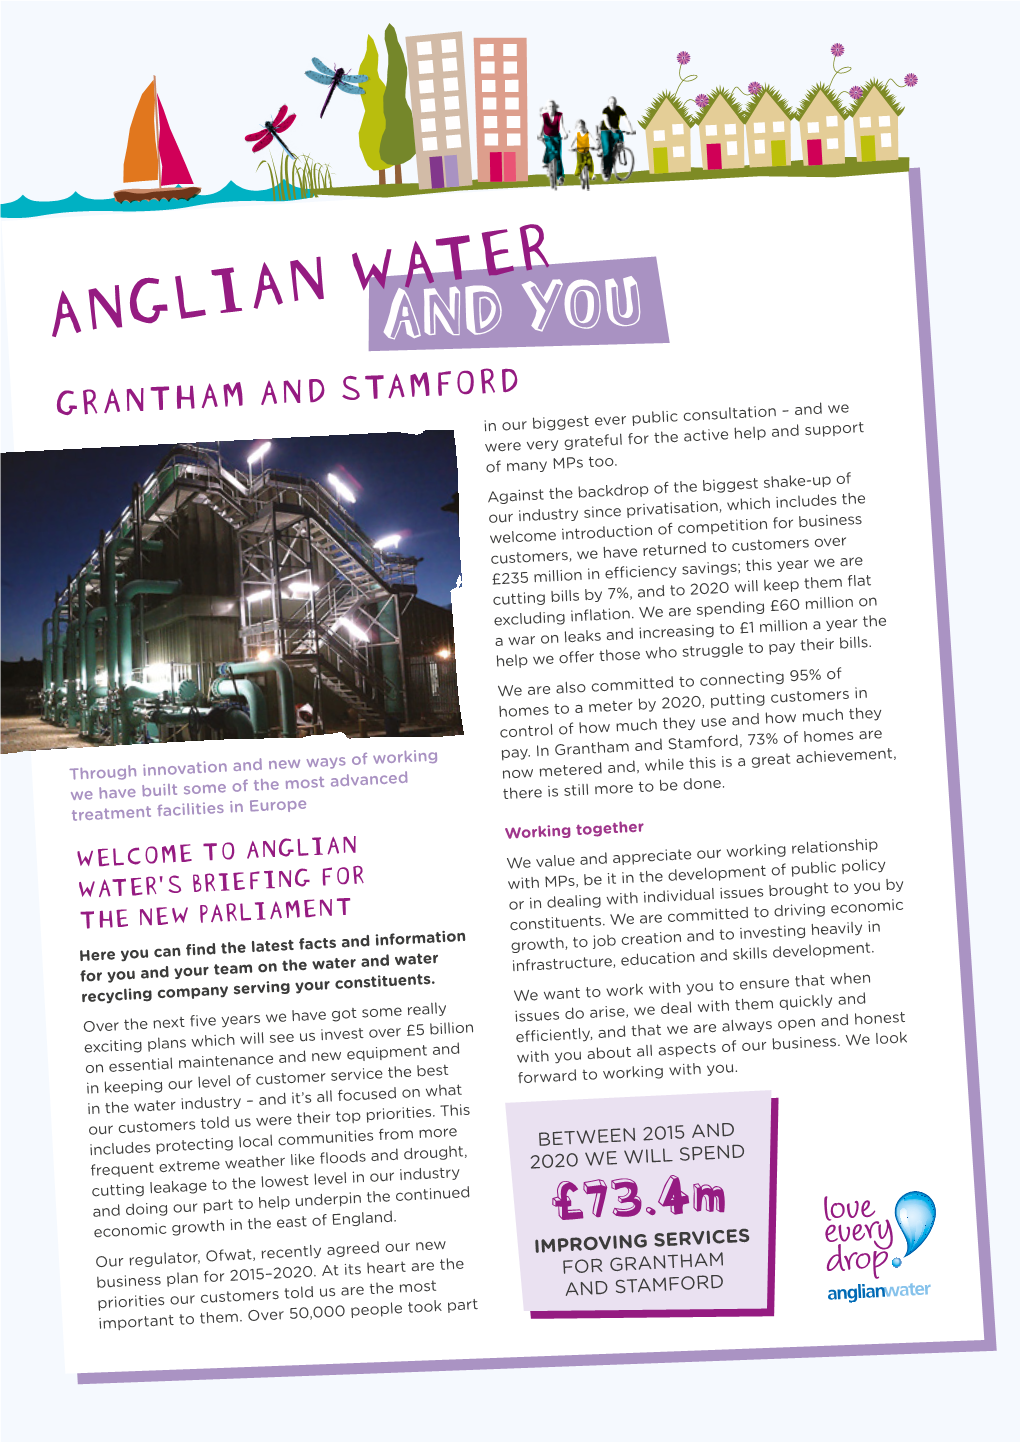 ANGLIAN WATERAND YOU GRANTHAM and STAMFORD in Our Biggest Ever Public Consultation – and We Were Very Grateful for the Active Help and Support of Many Mps Too